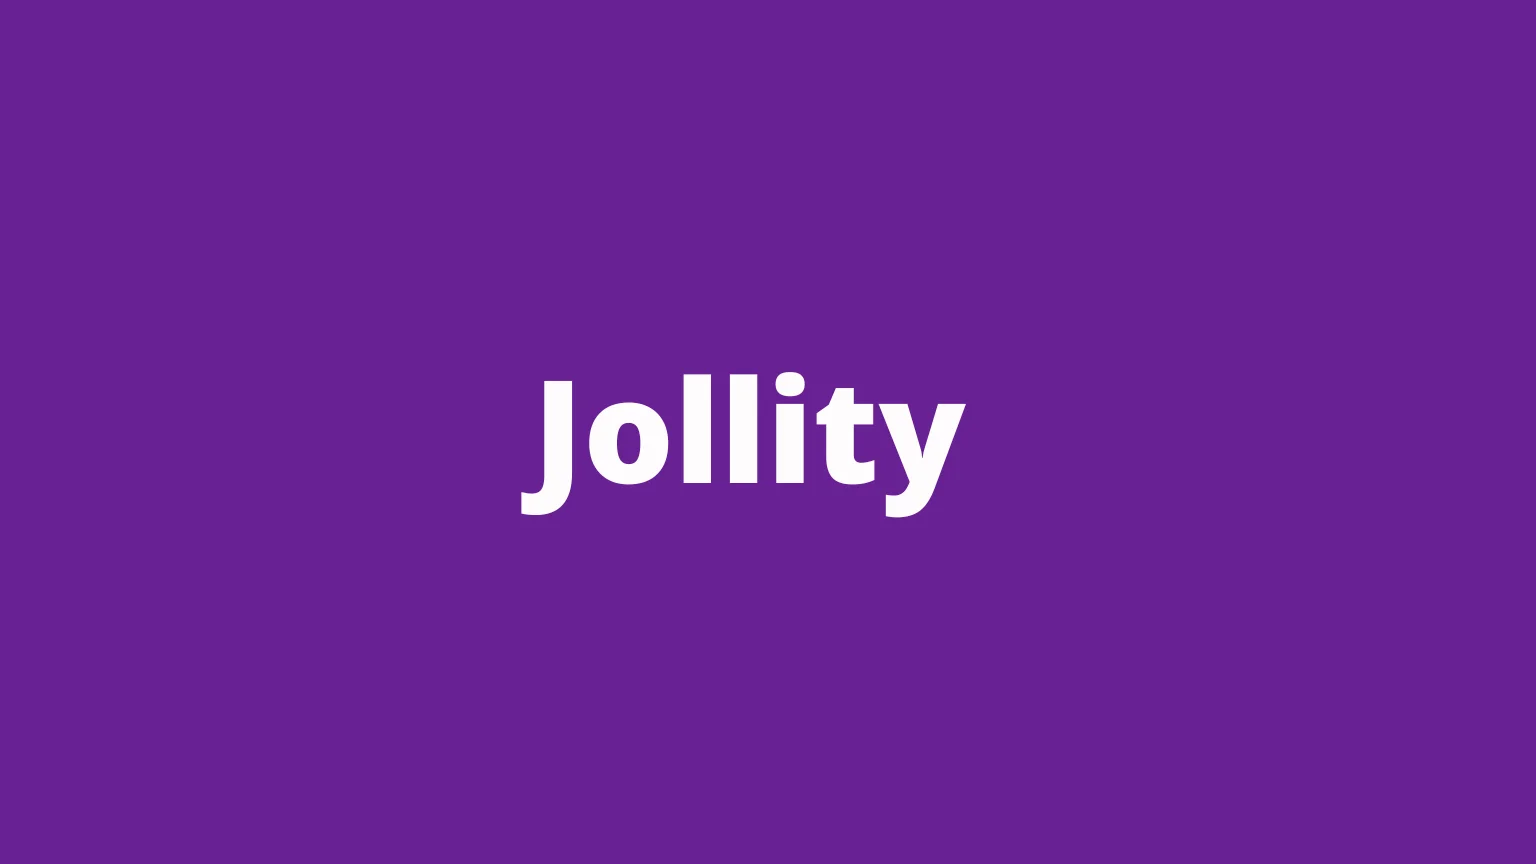 The word jollity and its meaning